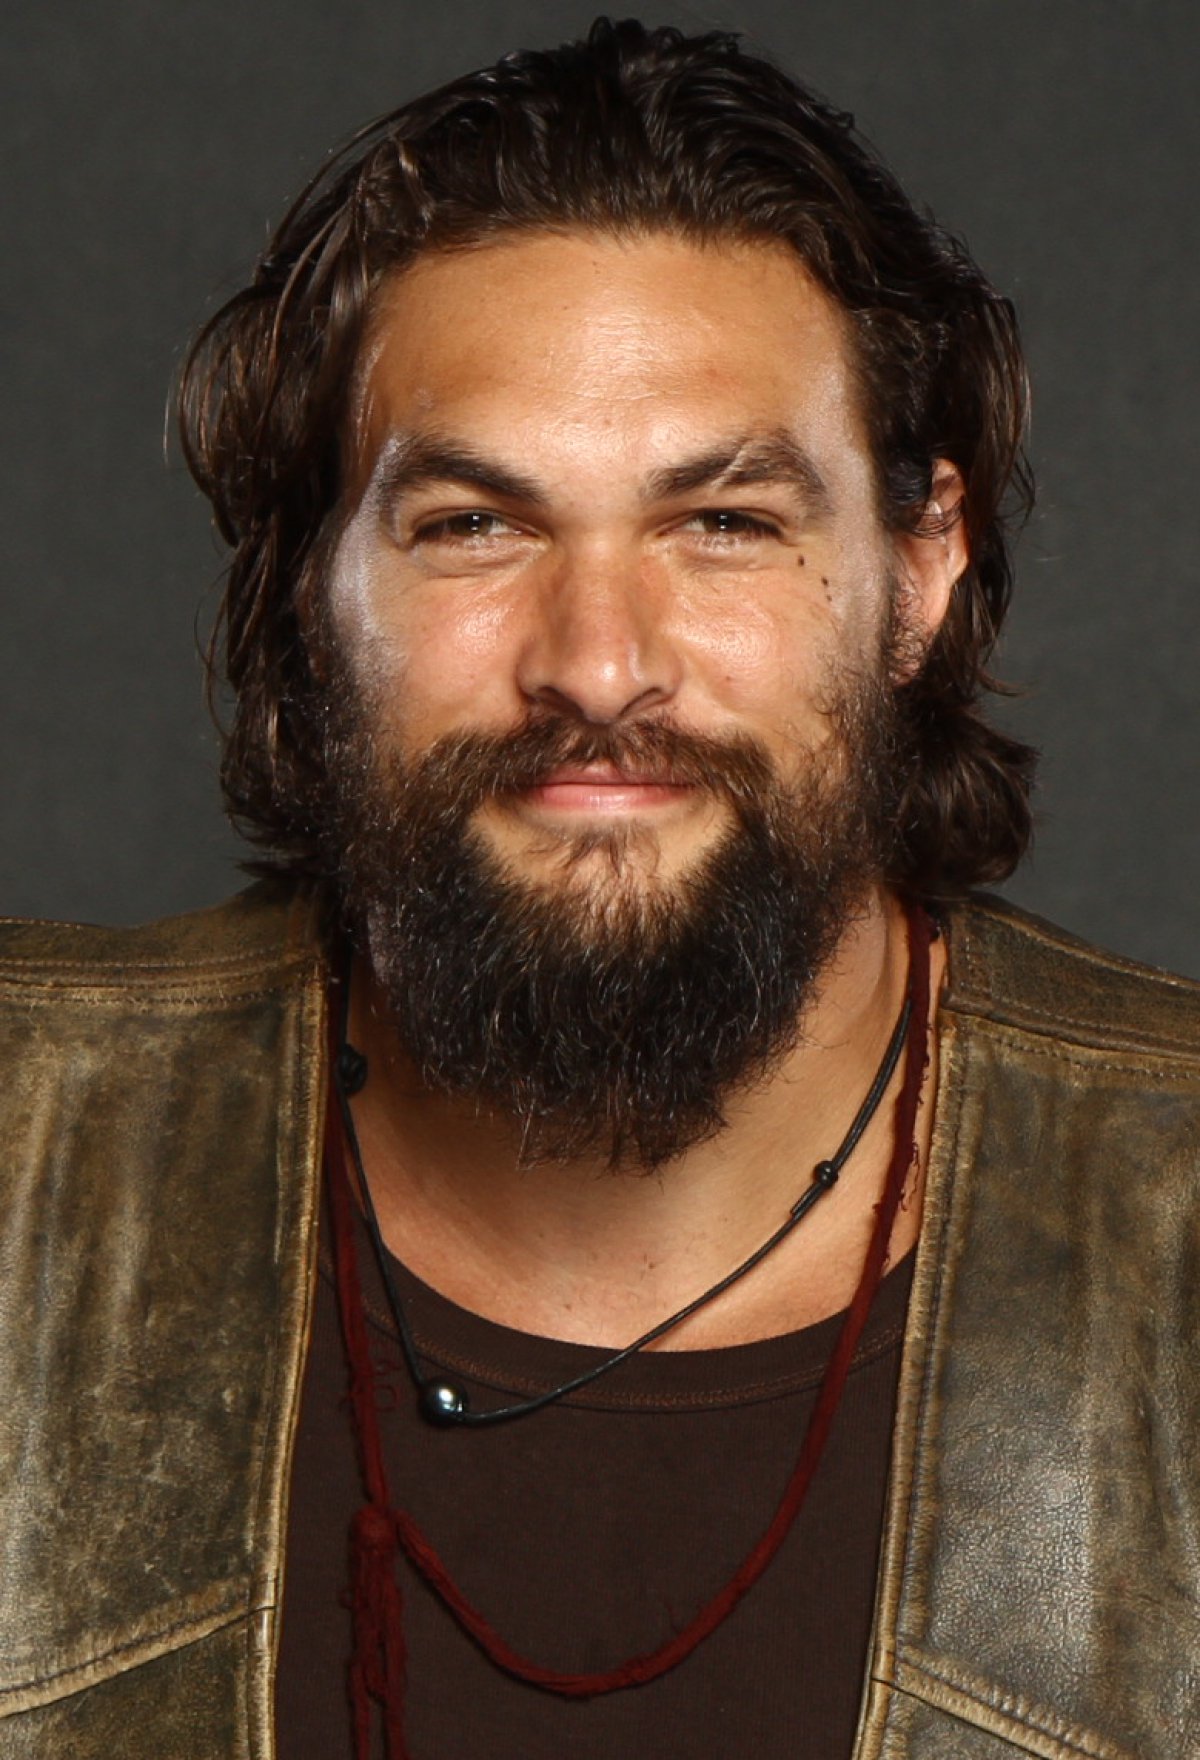 Jason Momoa plays 18th century outlaw in trailer for Netflix's new 'Frontier' series ...1200 x 1760